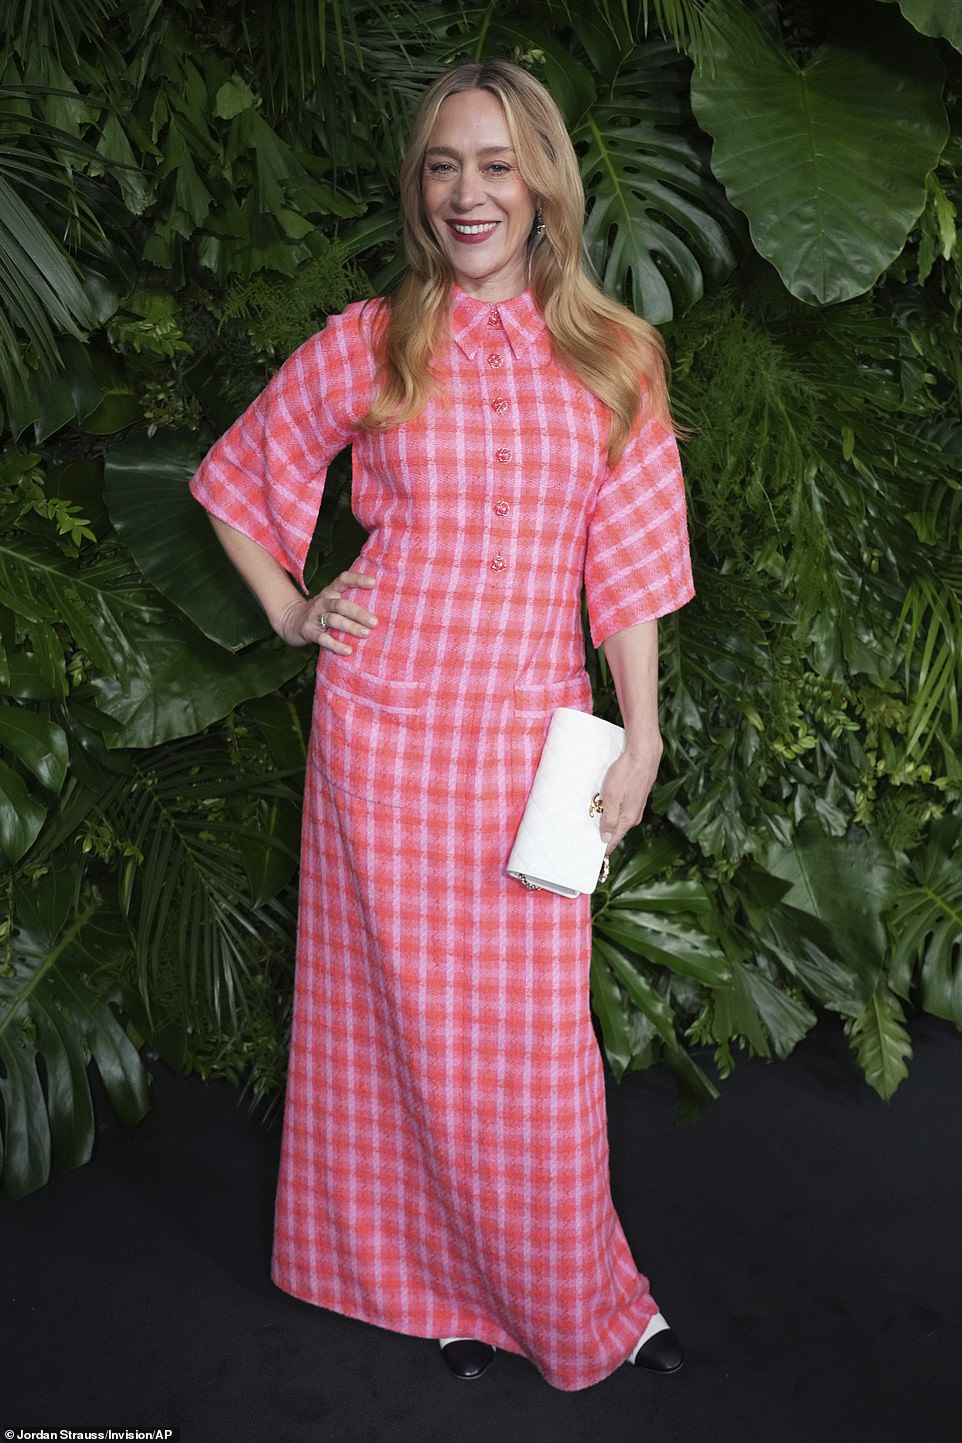 Chloe Sevigny looked radiant in a pink and orange plaid dress that had two pockets around the lower waist and buttons at the top.